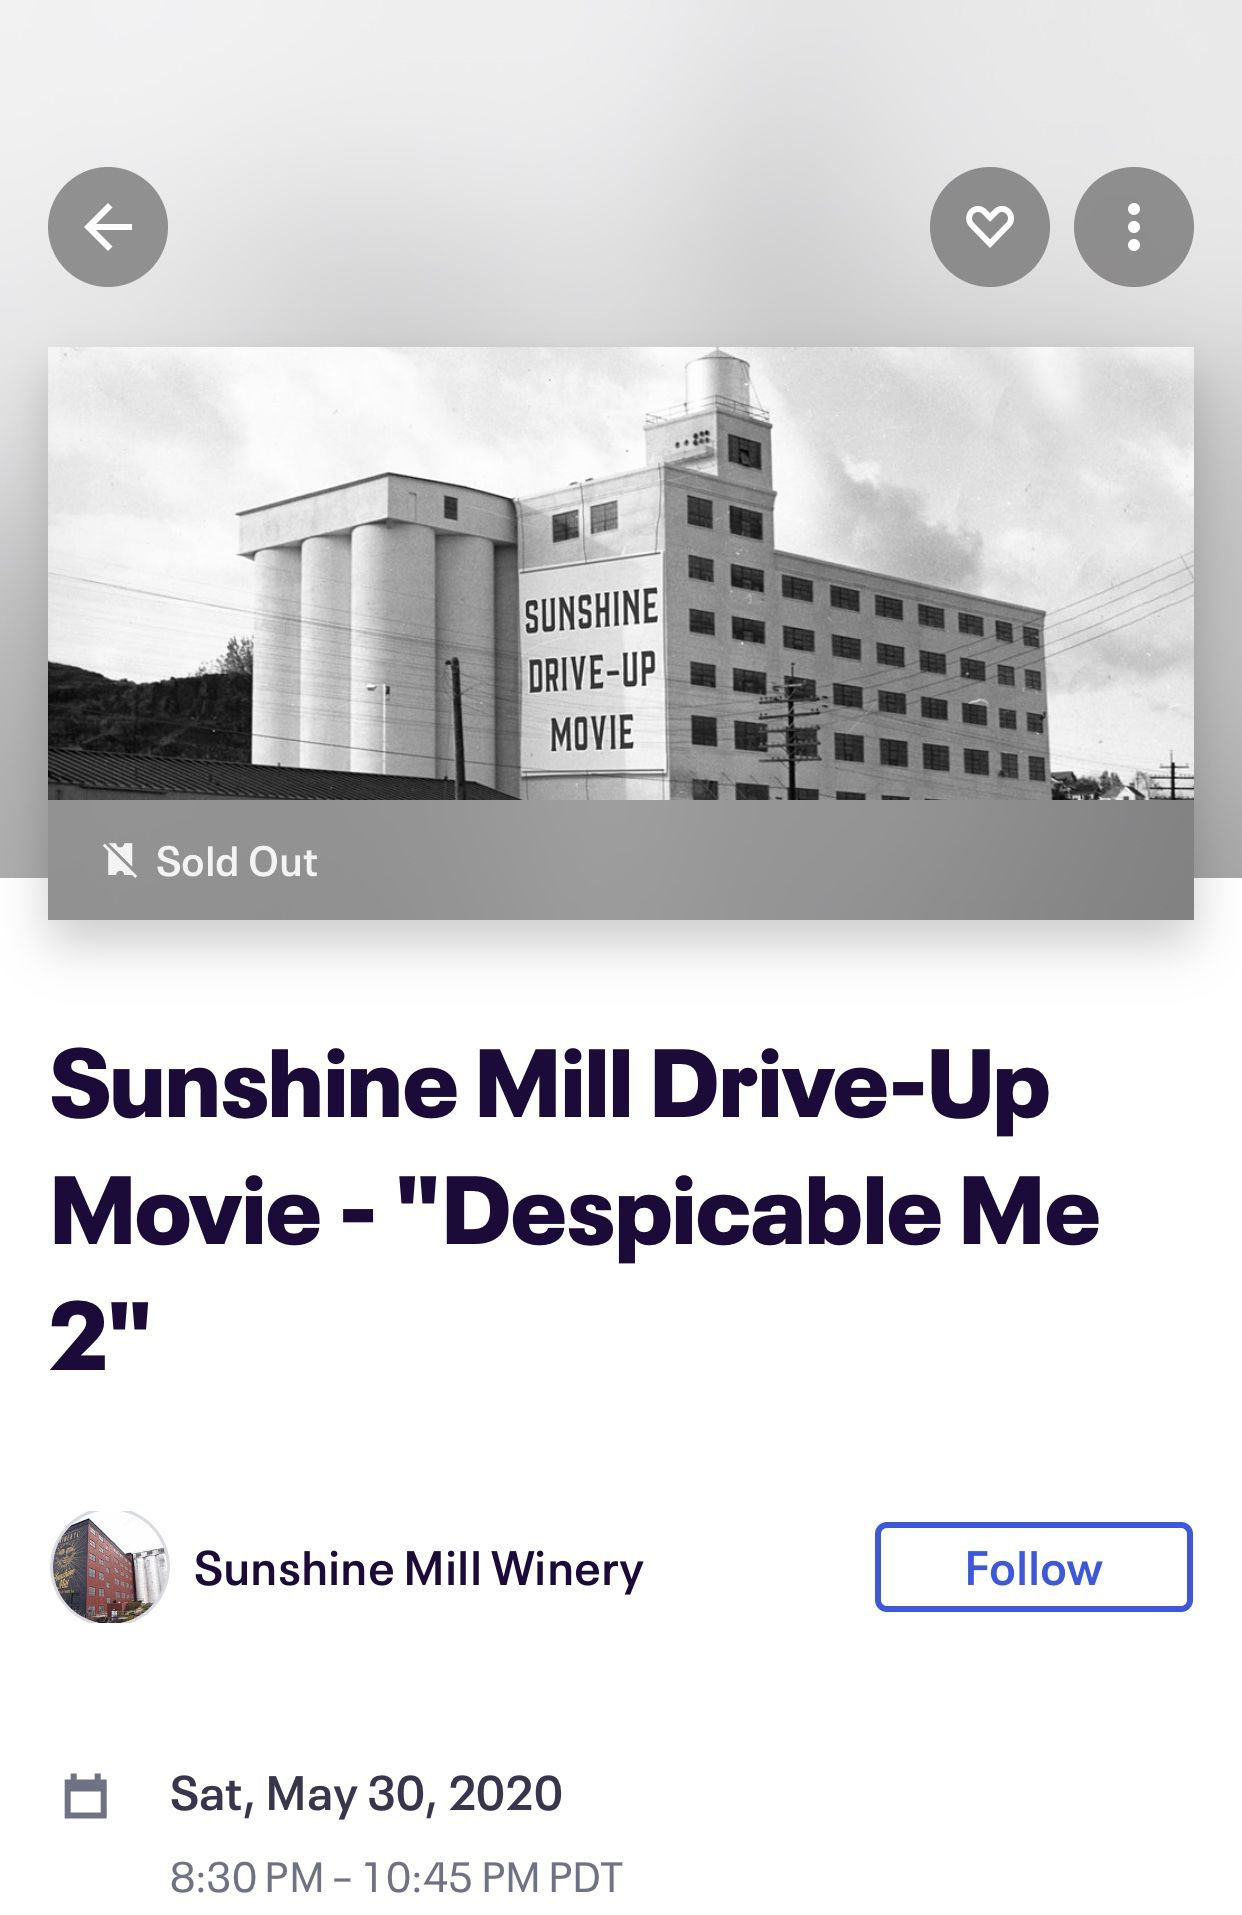 Drive in theater tickets